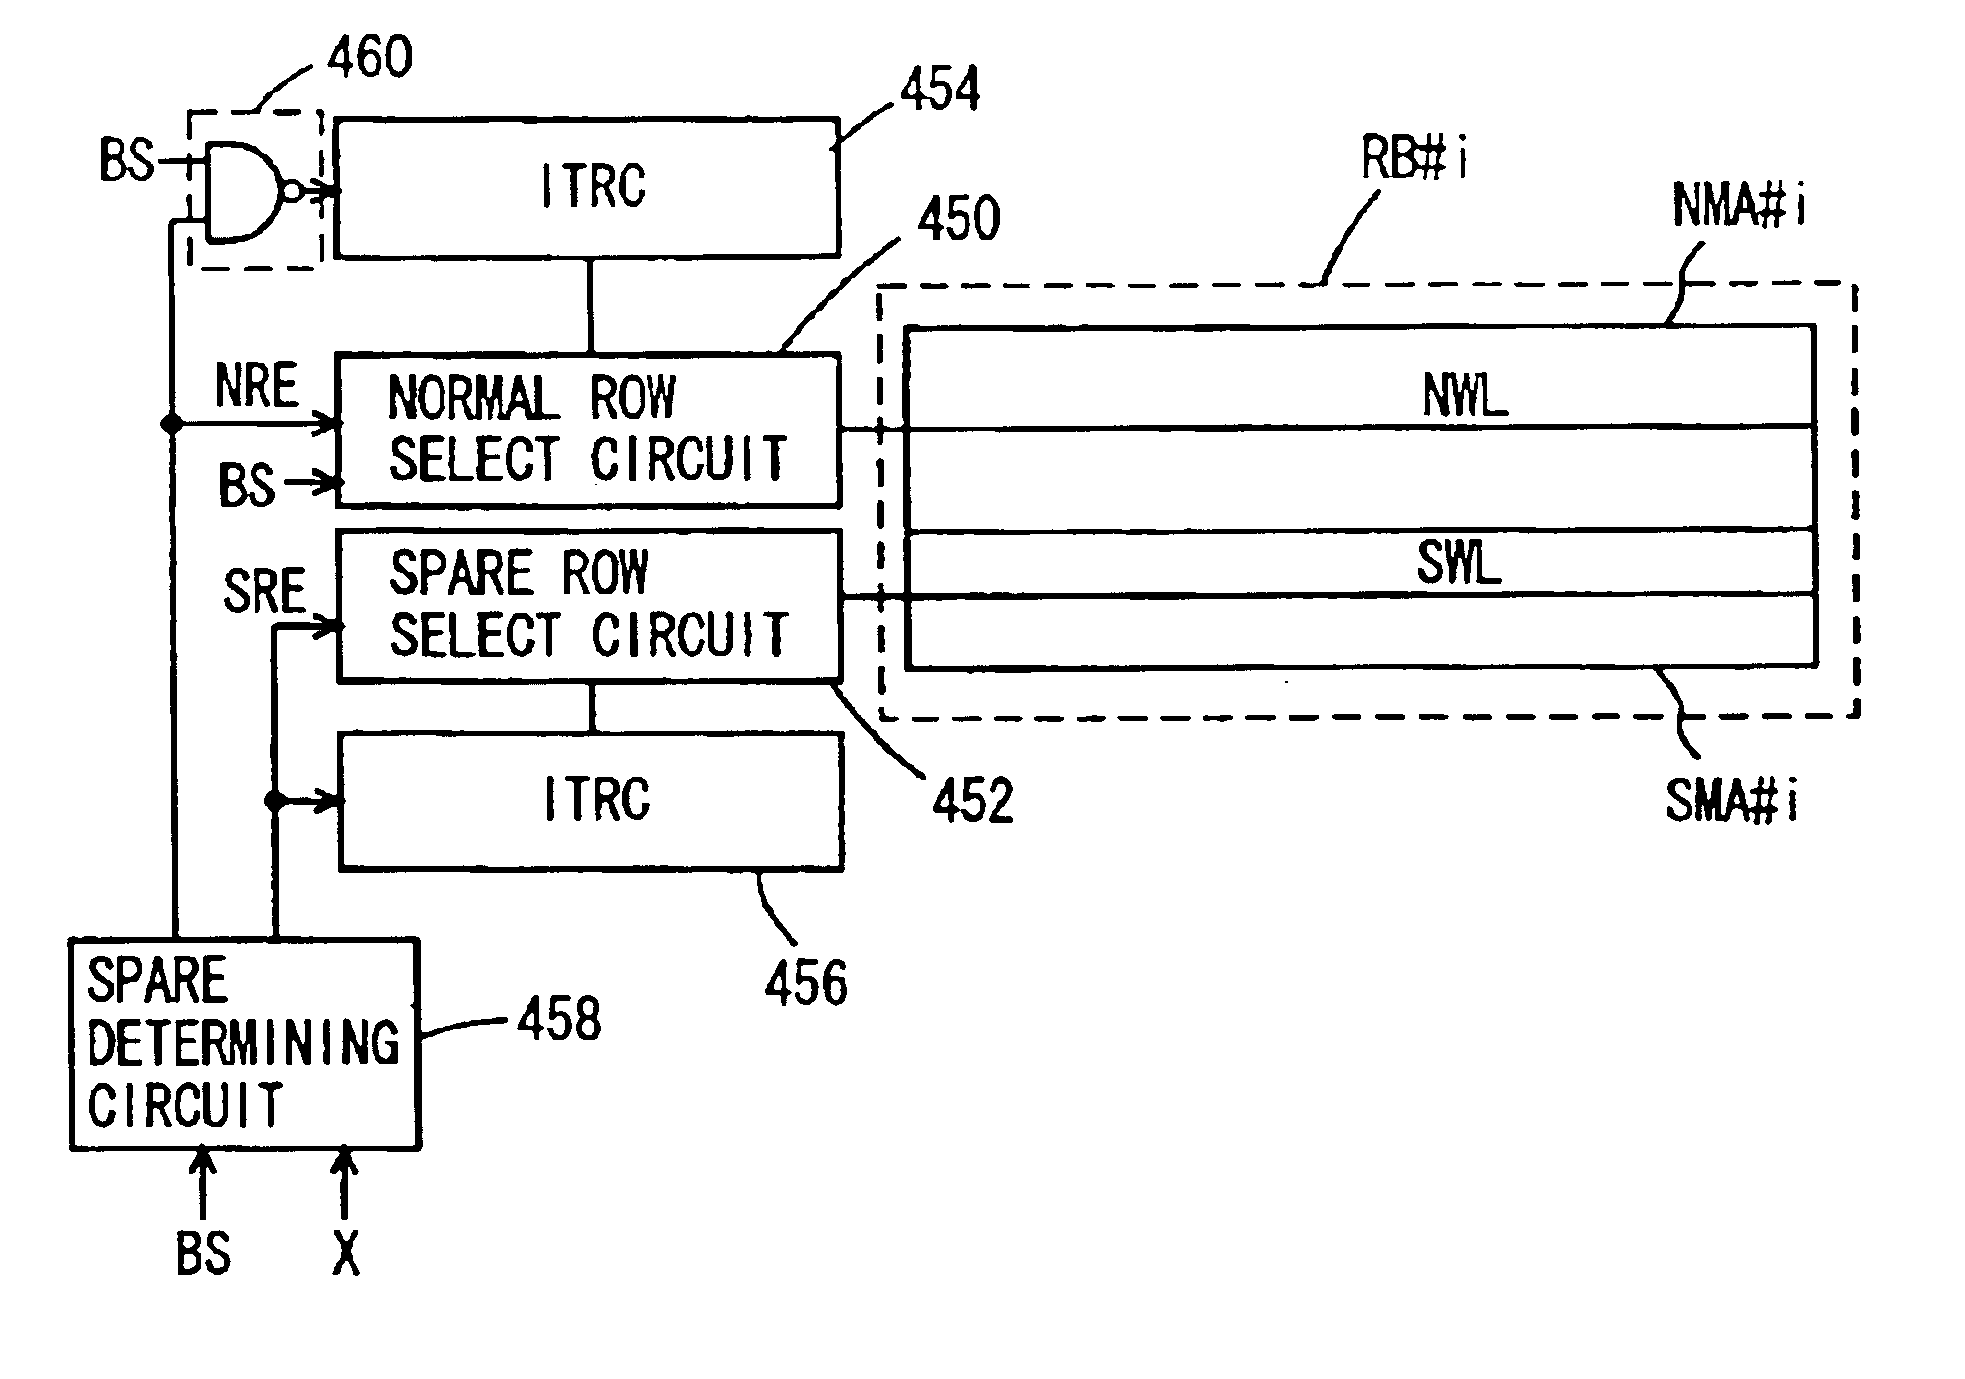 Semiconductor integrated circuit device operating with low power consumption